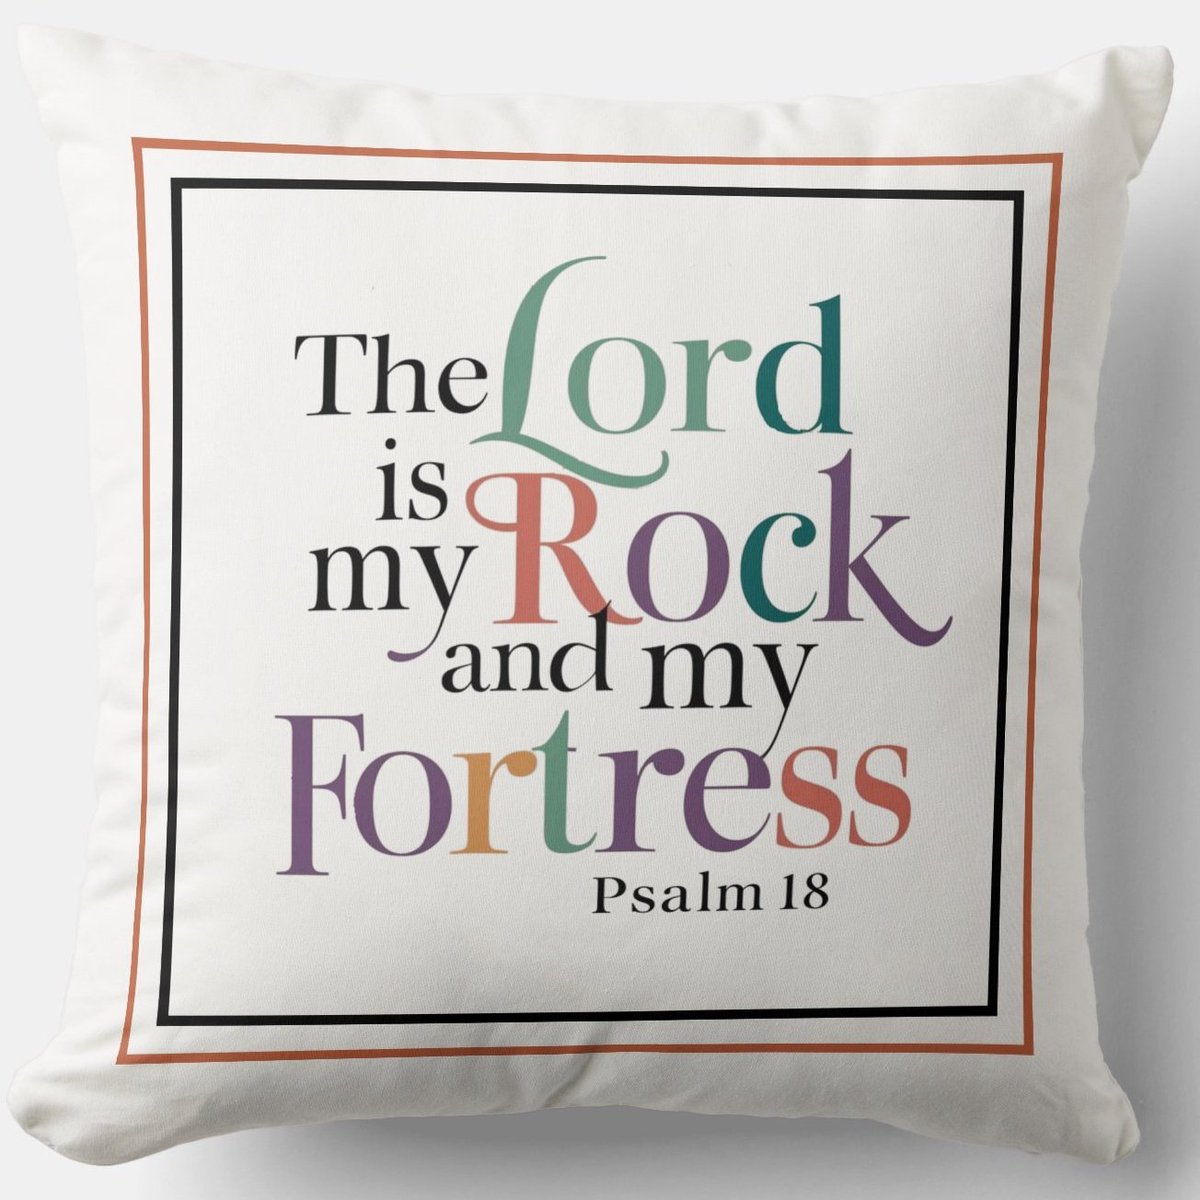 The Lord Is My Rock and My Fortress Throw #Pillow zazzle.com/the_lord_is_my… Psalm 18:2 #JesusChrist #JesusSaves #Jesus #hope #god #christian #spiritual #Homedecoration #uniquegift #giftideas #MothersDayGifts #giftformom #giftidea #HolySpirit #pillows #gift #giftsforher #giftsformom